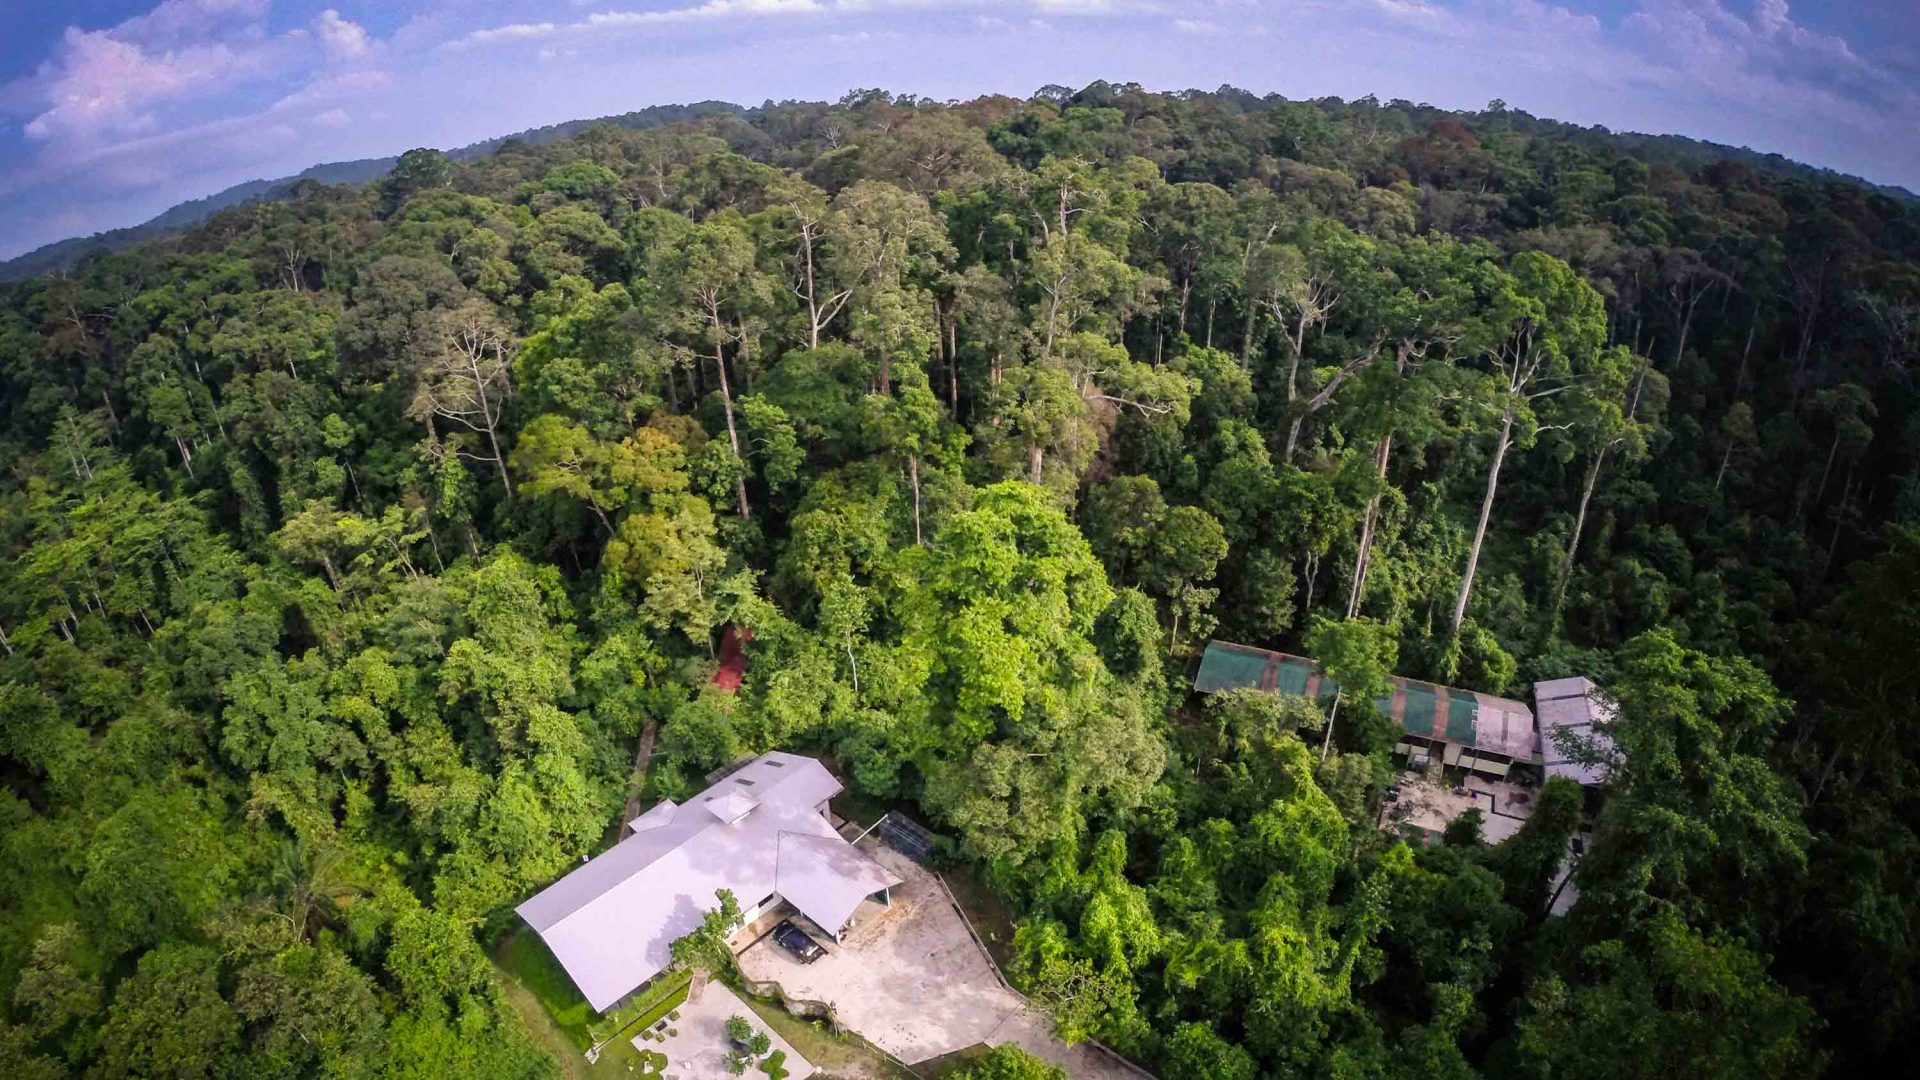 An aerial view of the Bornean Sun Bear Conservation Centre surrounded by forest.